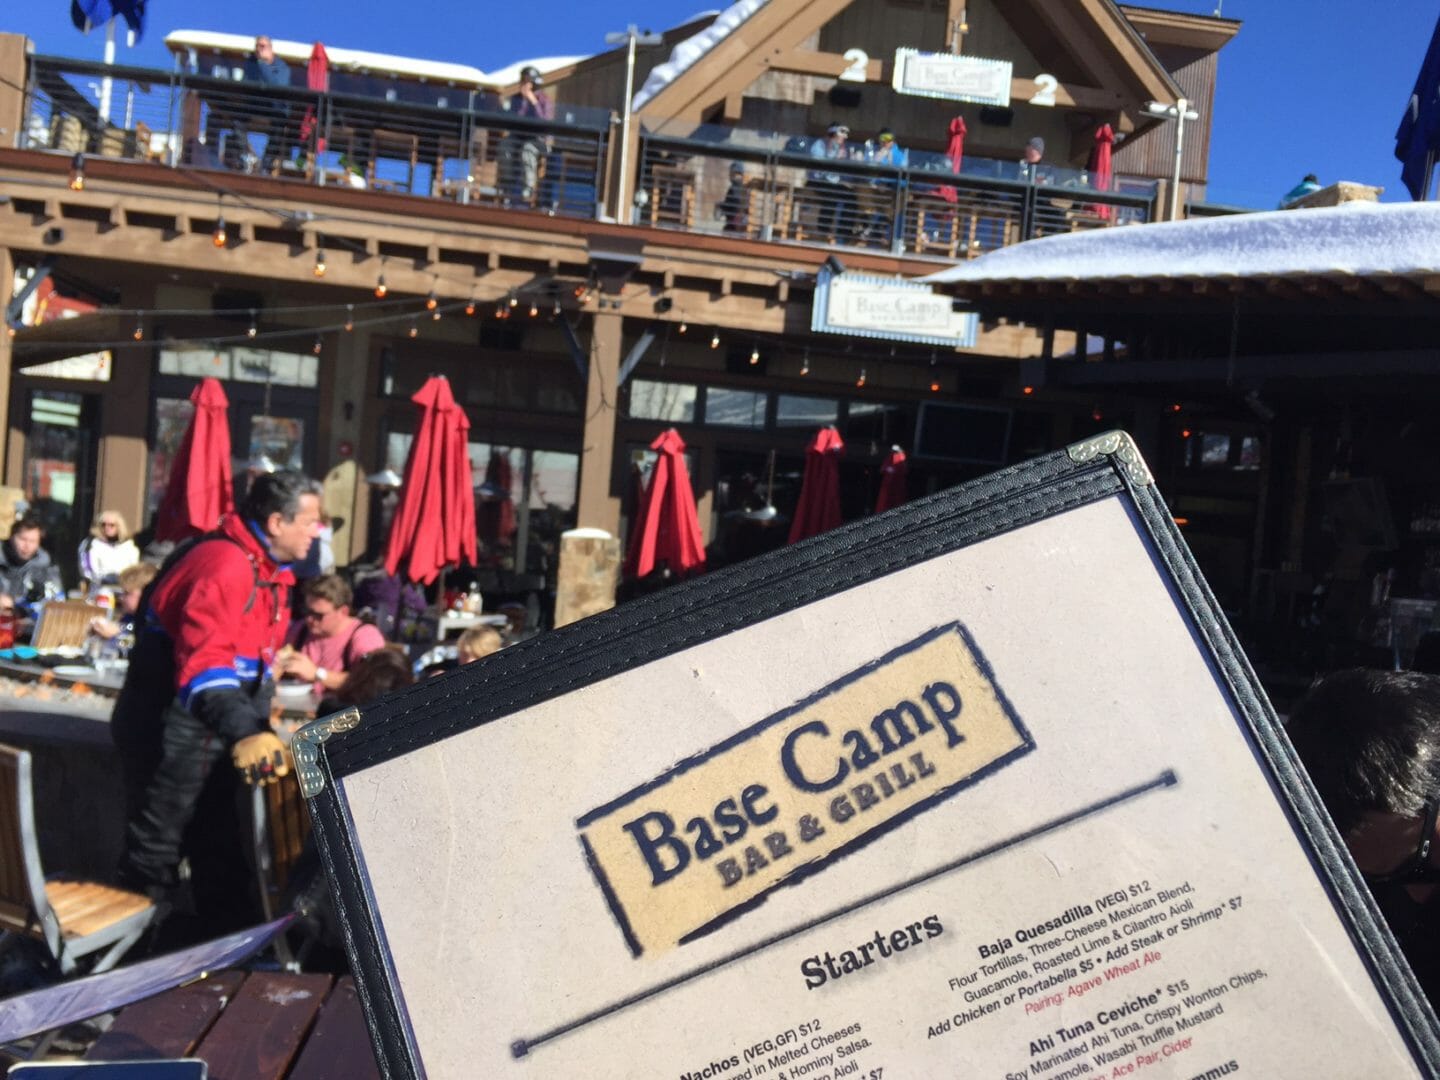 Snowmass Base Camp Bar and Grill